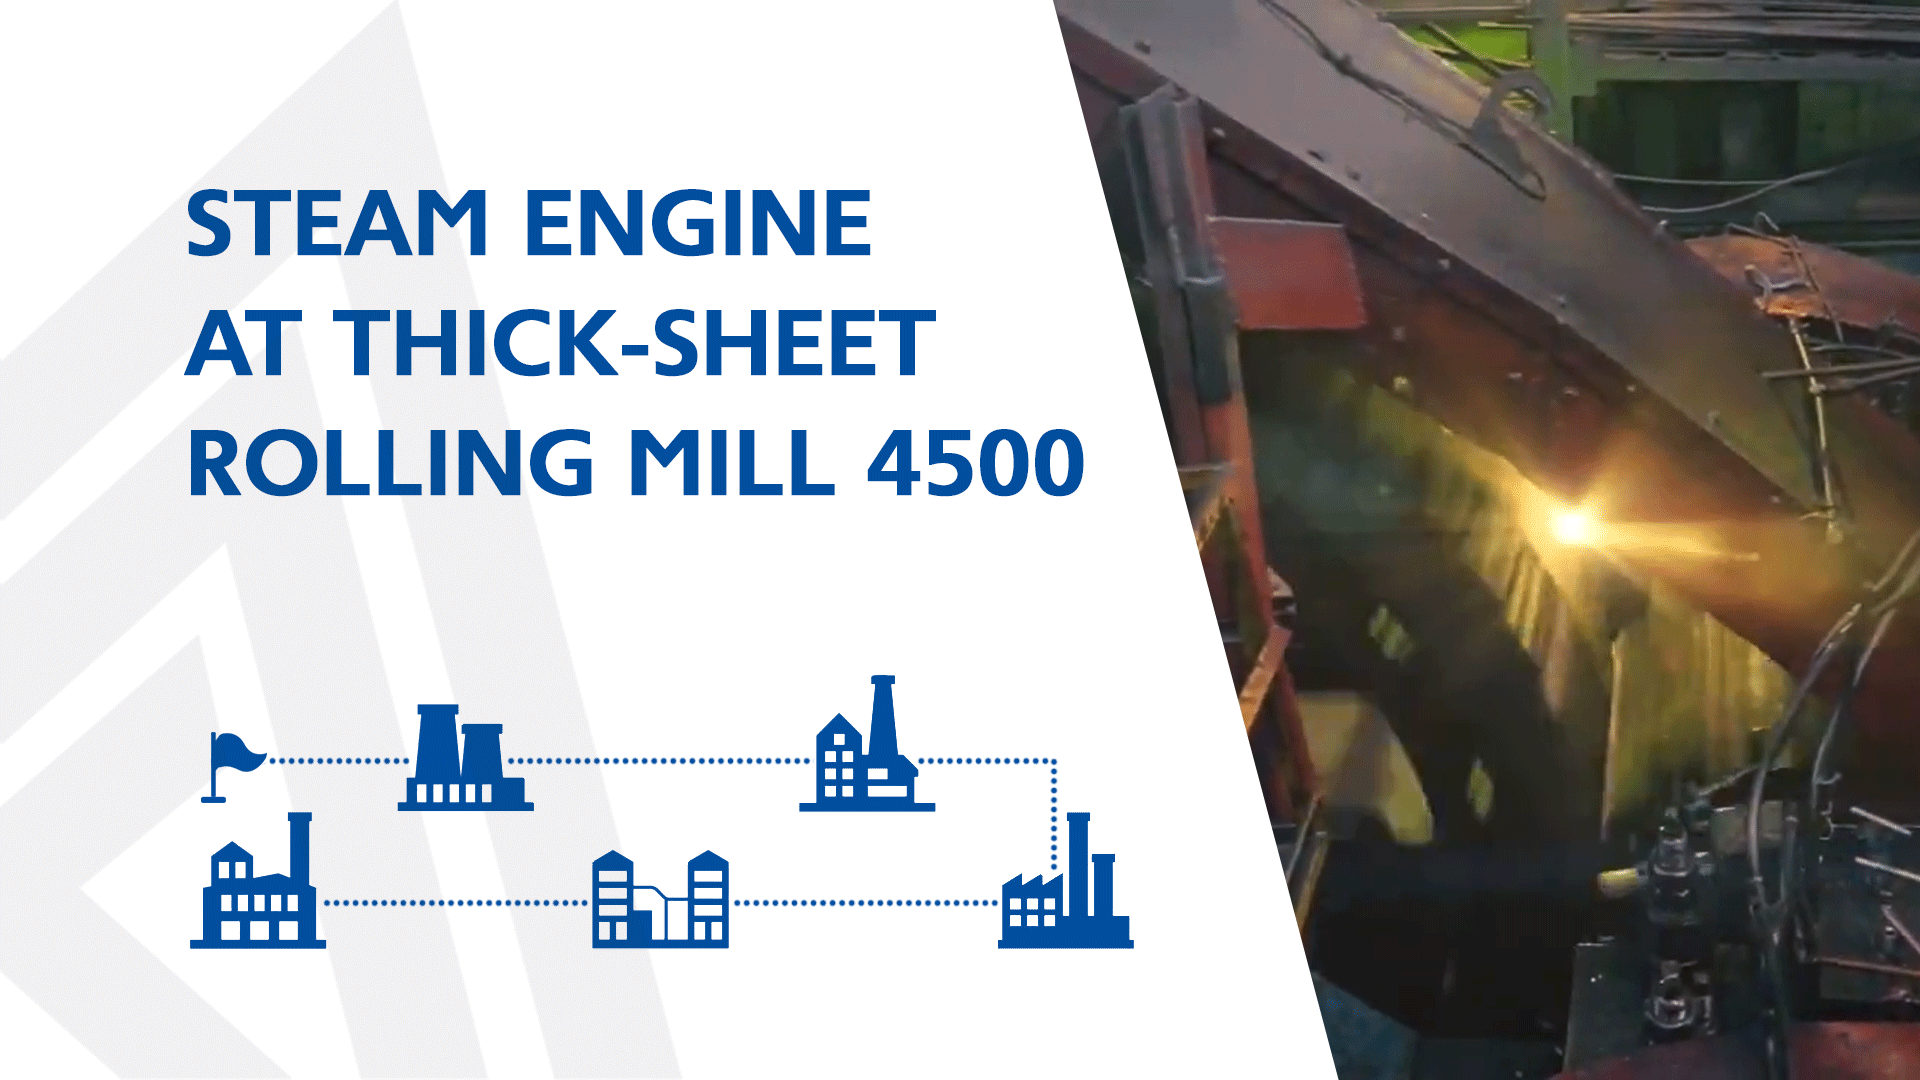 MMK-TOUR. Steam engine at thick-sheet rolling mill 4500